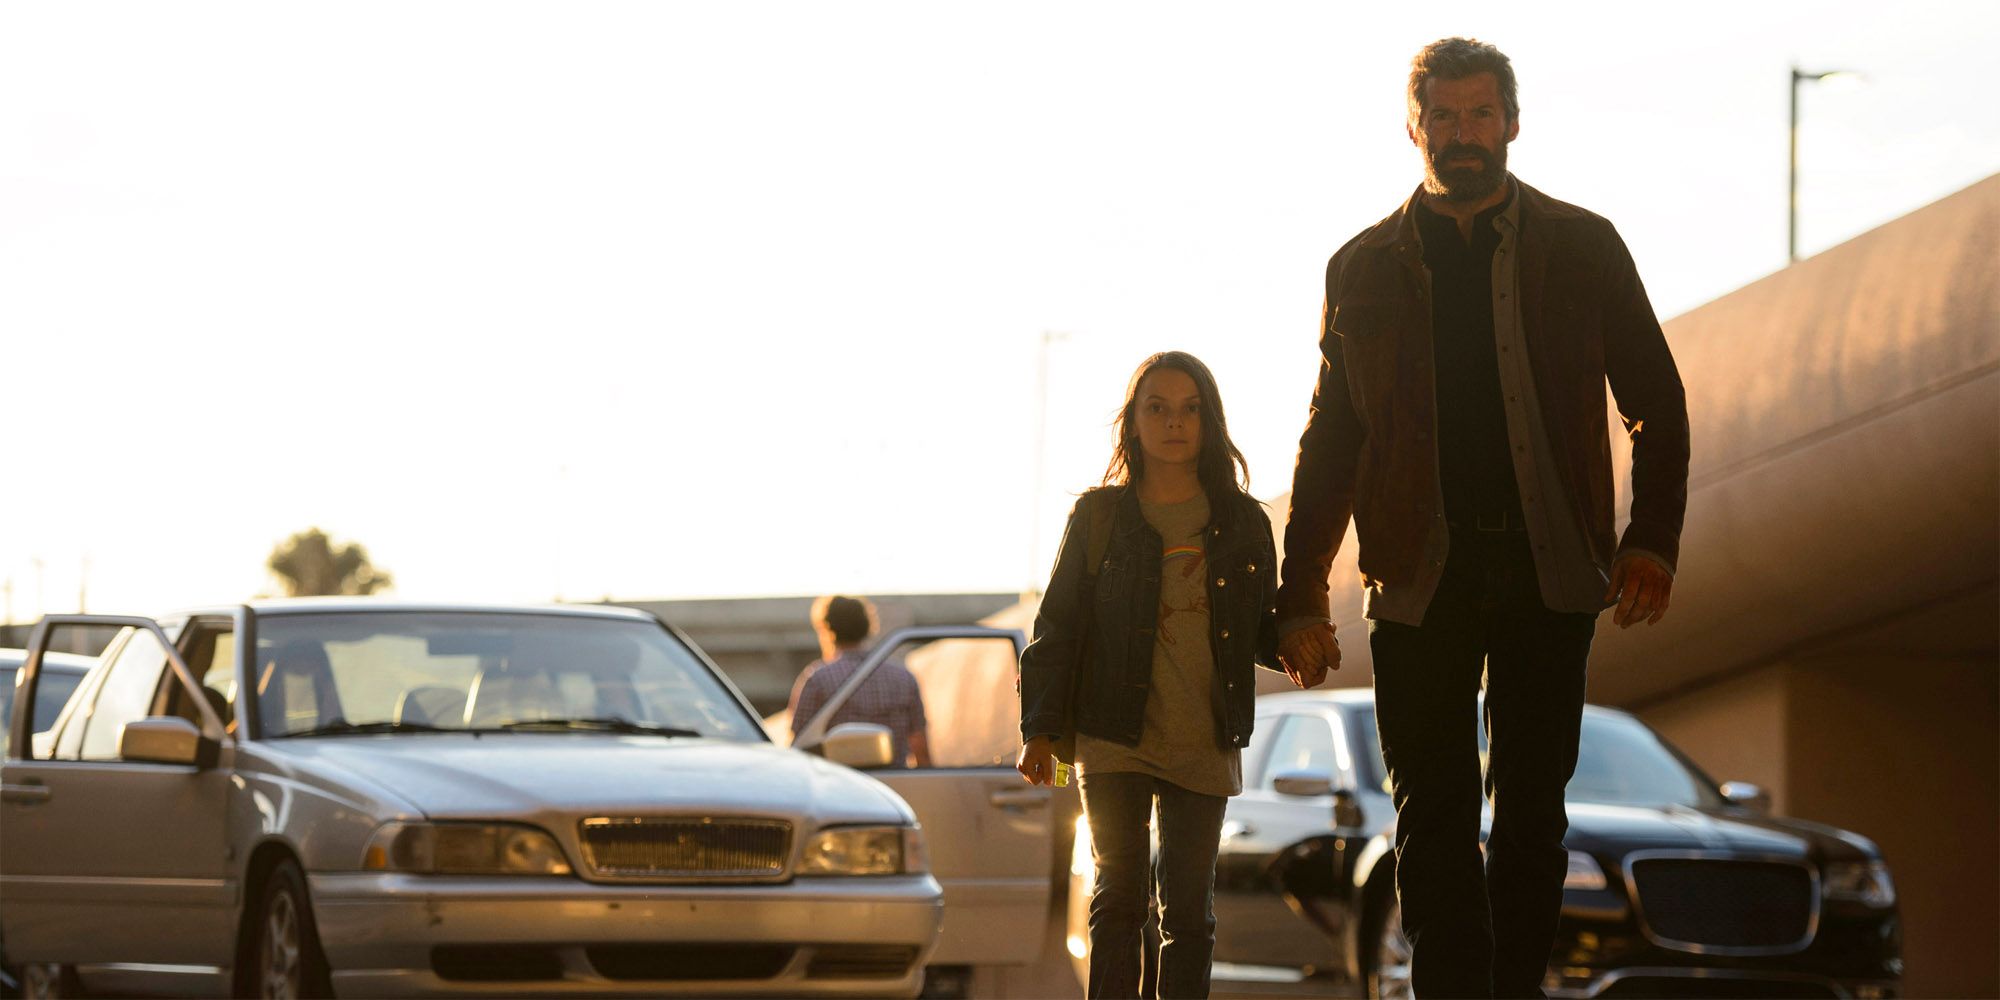 Dafne Keen as Laura and Hugh Jackman as Logan Holding Hands and Walking in 2017's Logan